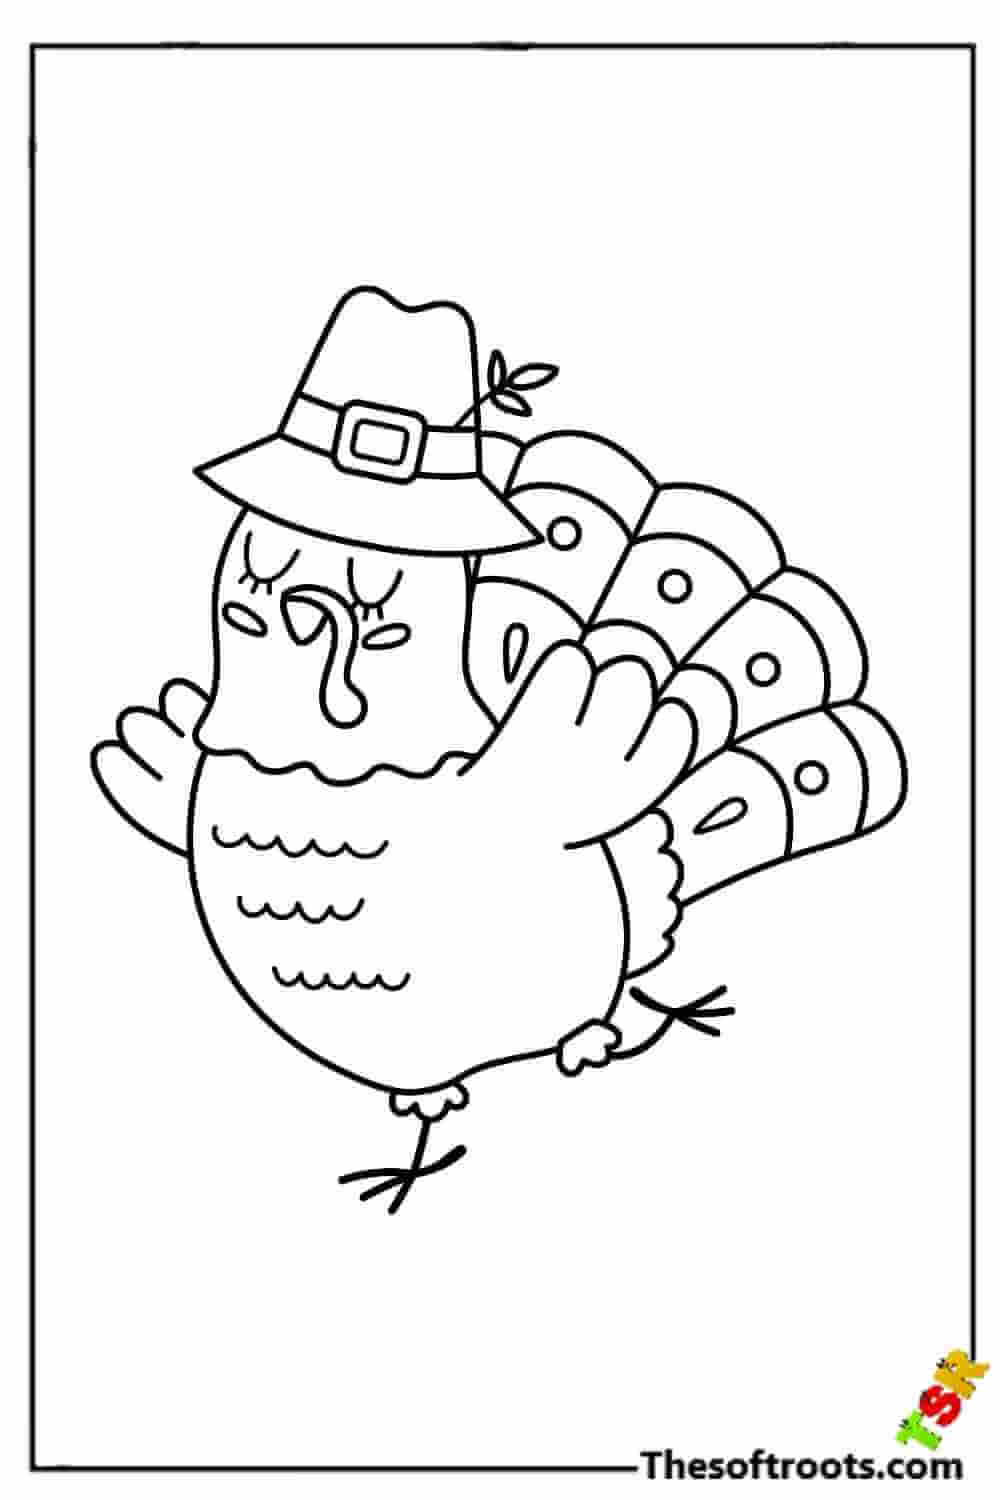 Cute cartoon turkey for kids coloring pages